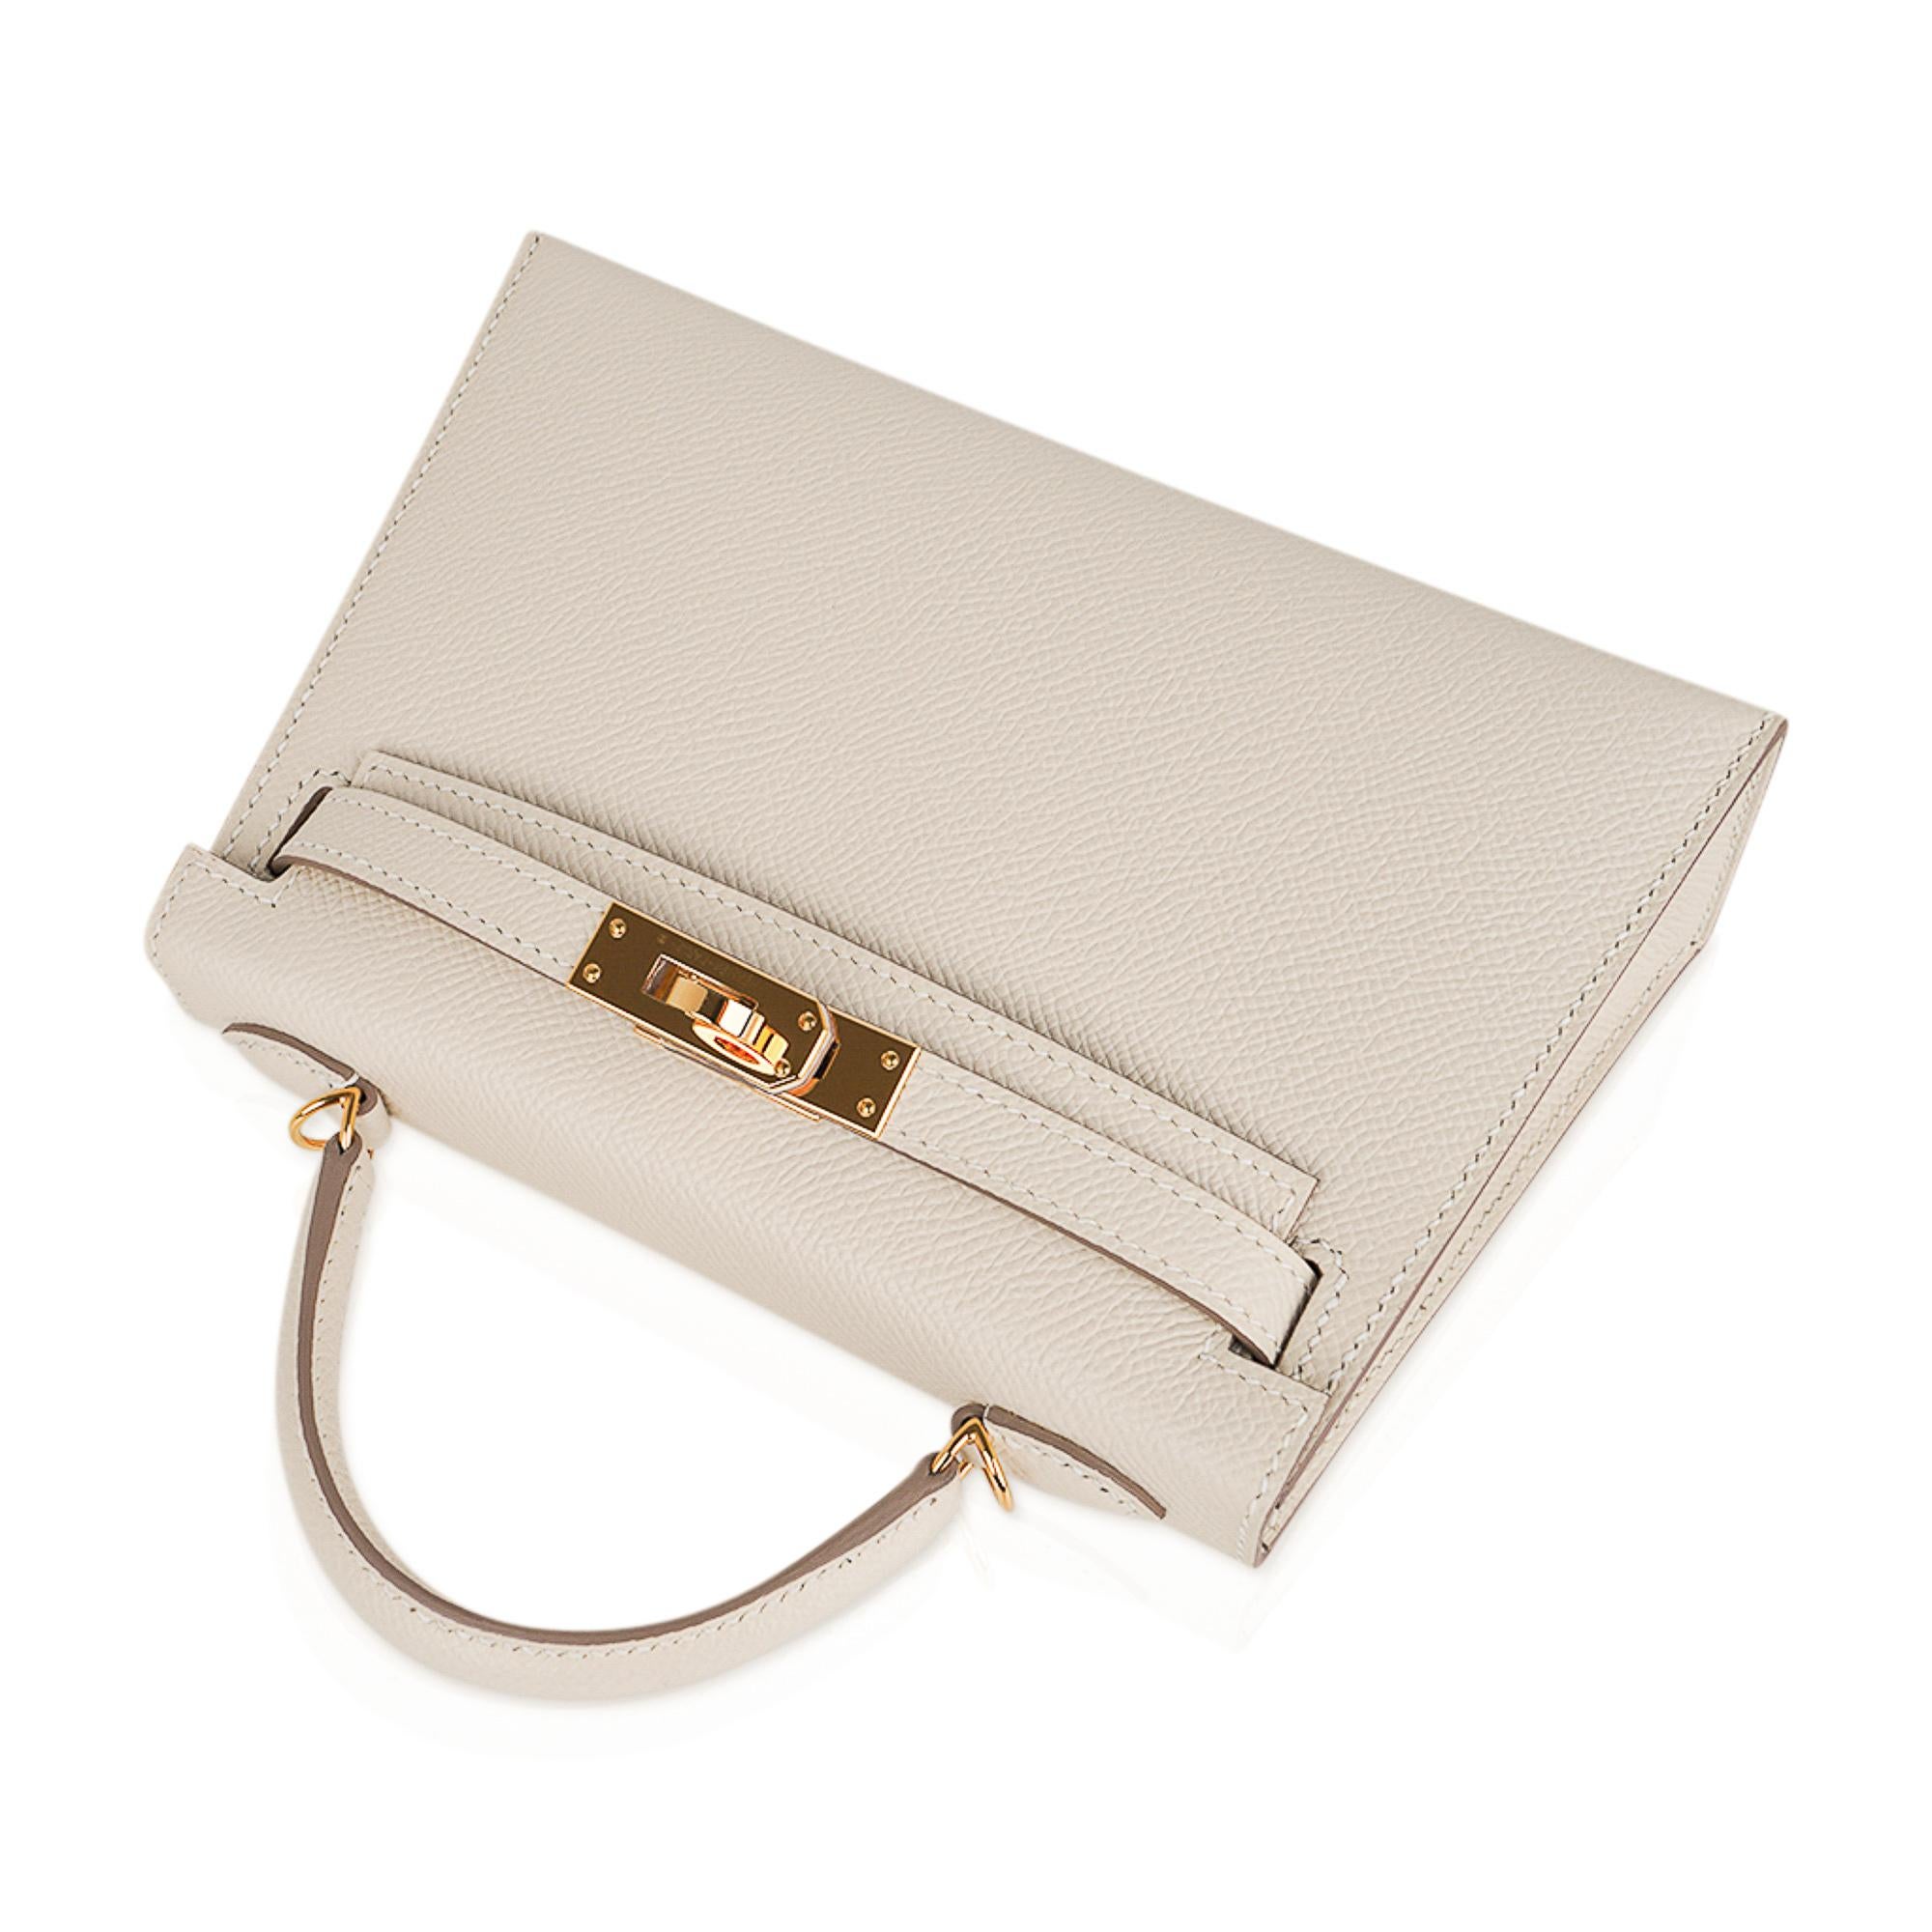 Hermes Kelly 20 Mini Sellier Bag Craie Epsom Leather Gold Hardware In Excellent Condition For Sale In Miami, FL